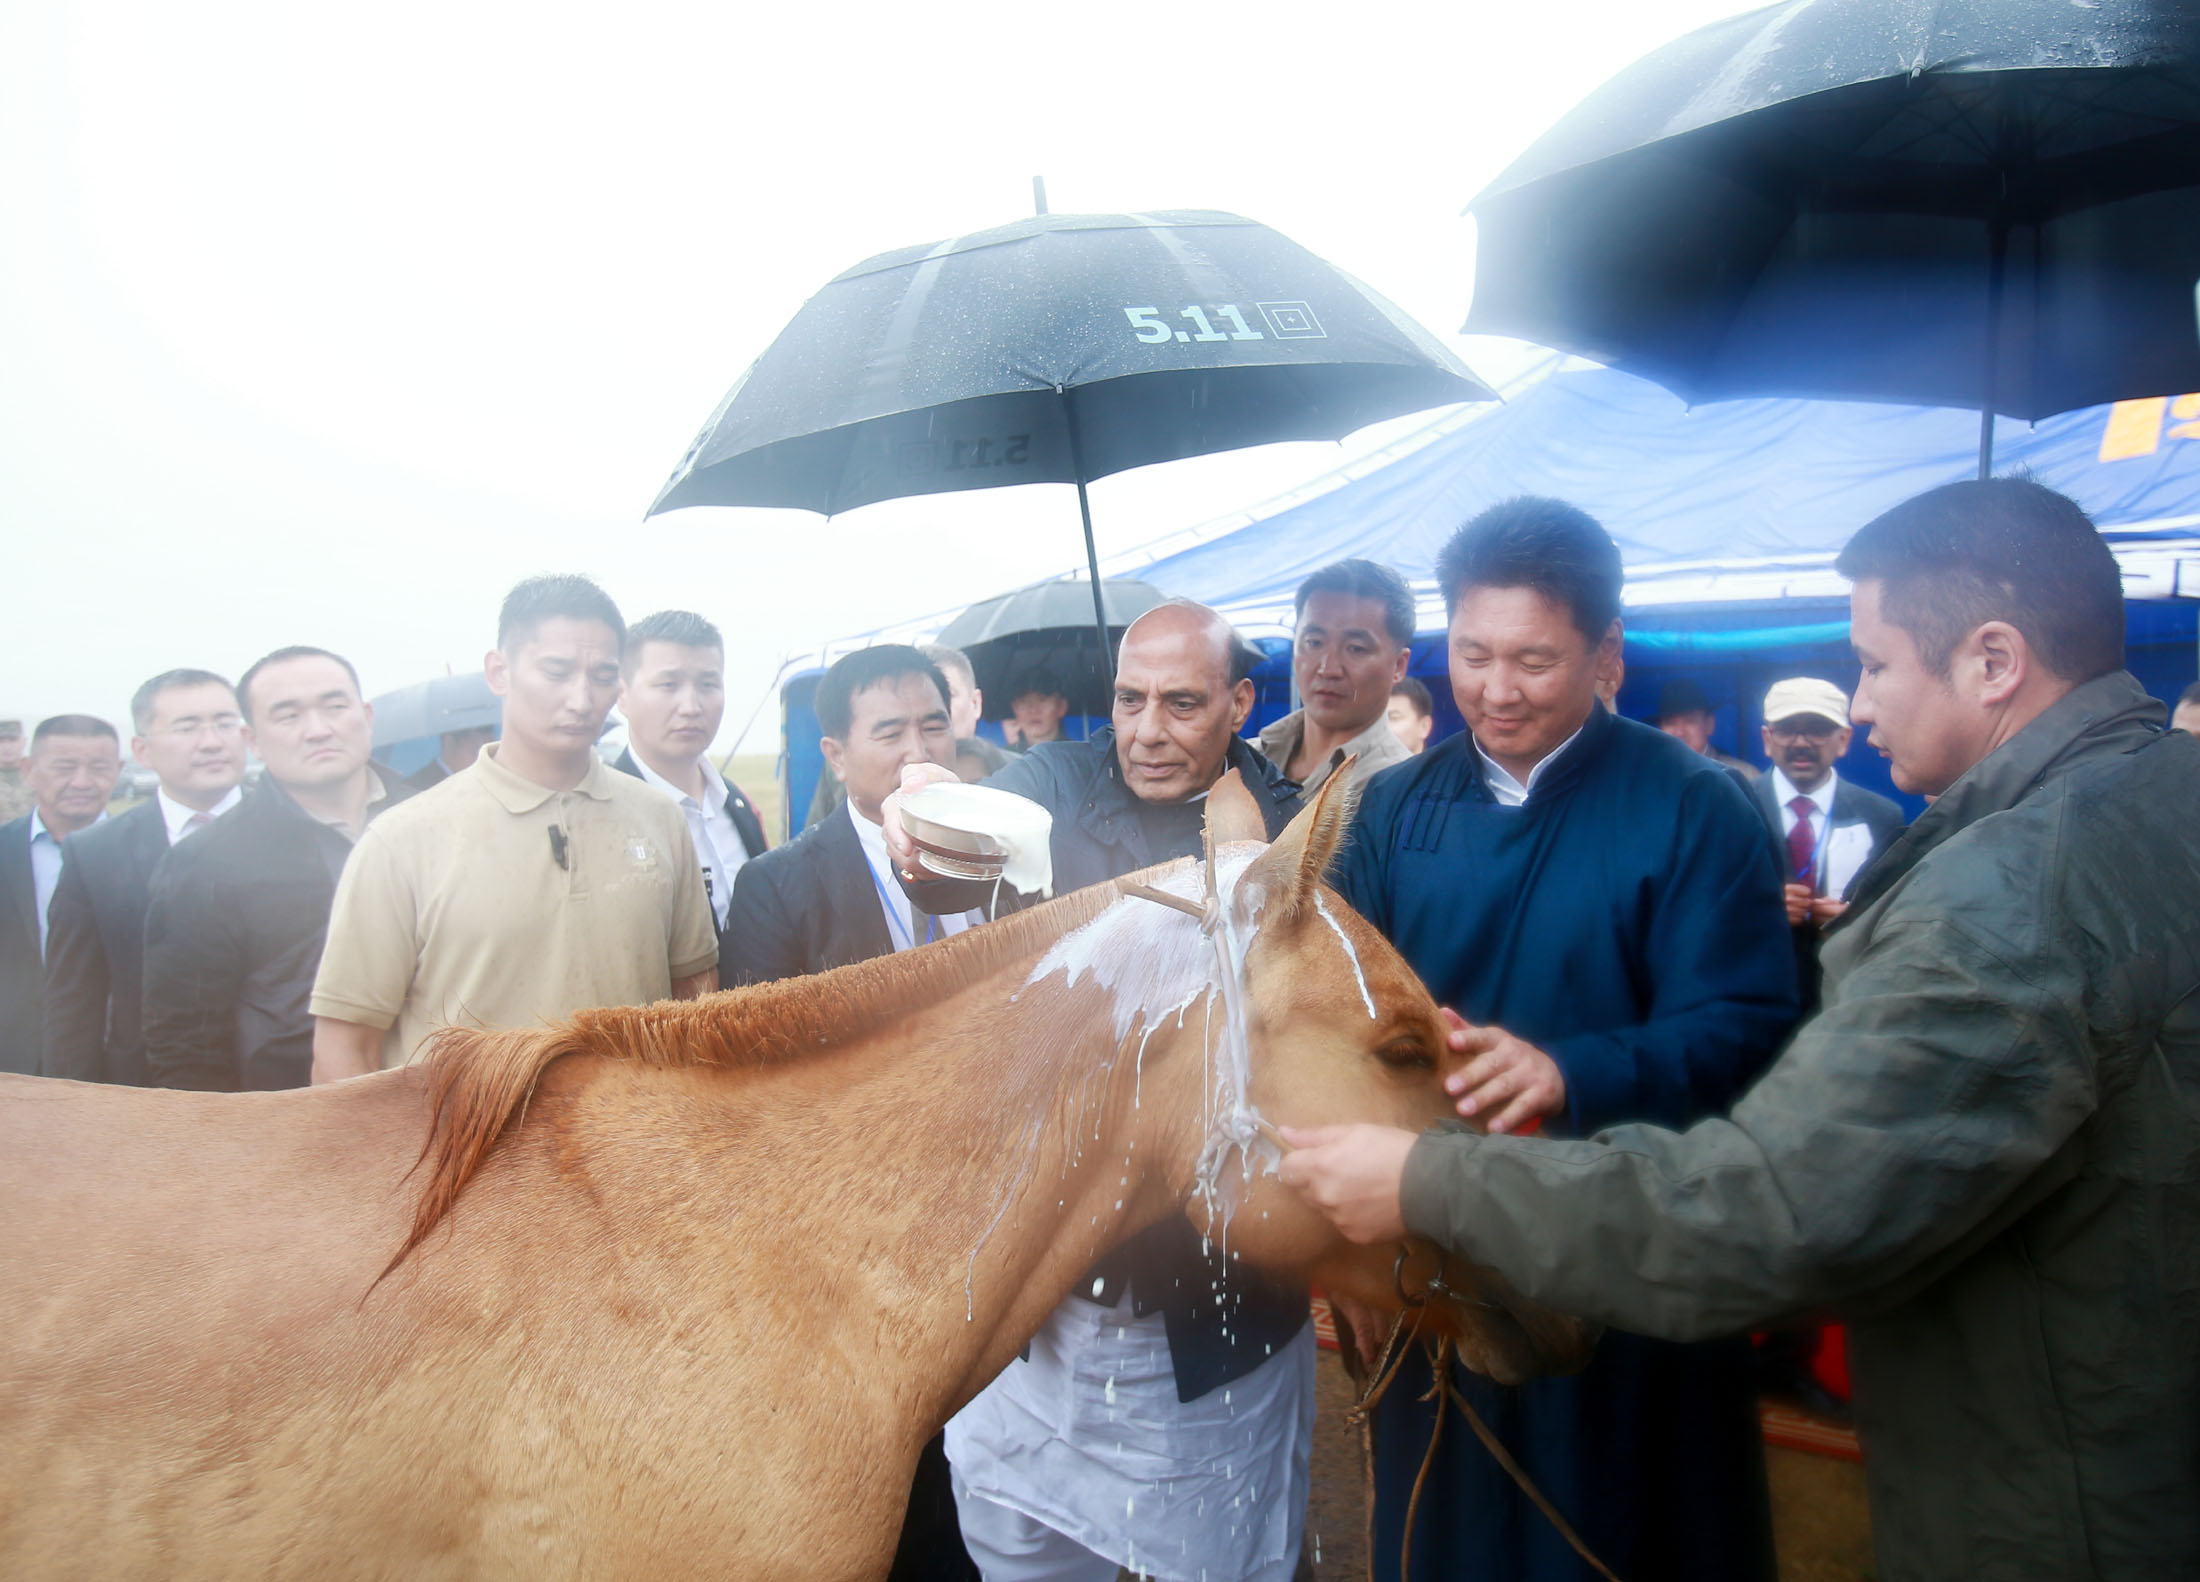 The Prime Minister of Mongolia, Mr. Ukhnaagin Khurelsukh presenting a horse to Shri Rajnath Singh, while honouring him on his maiden visit to the country, at Ulaanbaatar on June 23, 2018